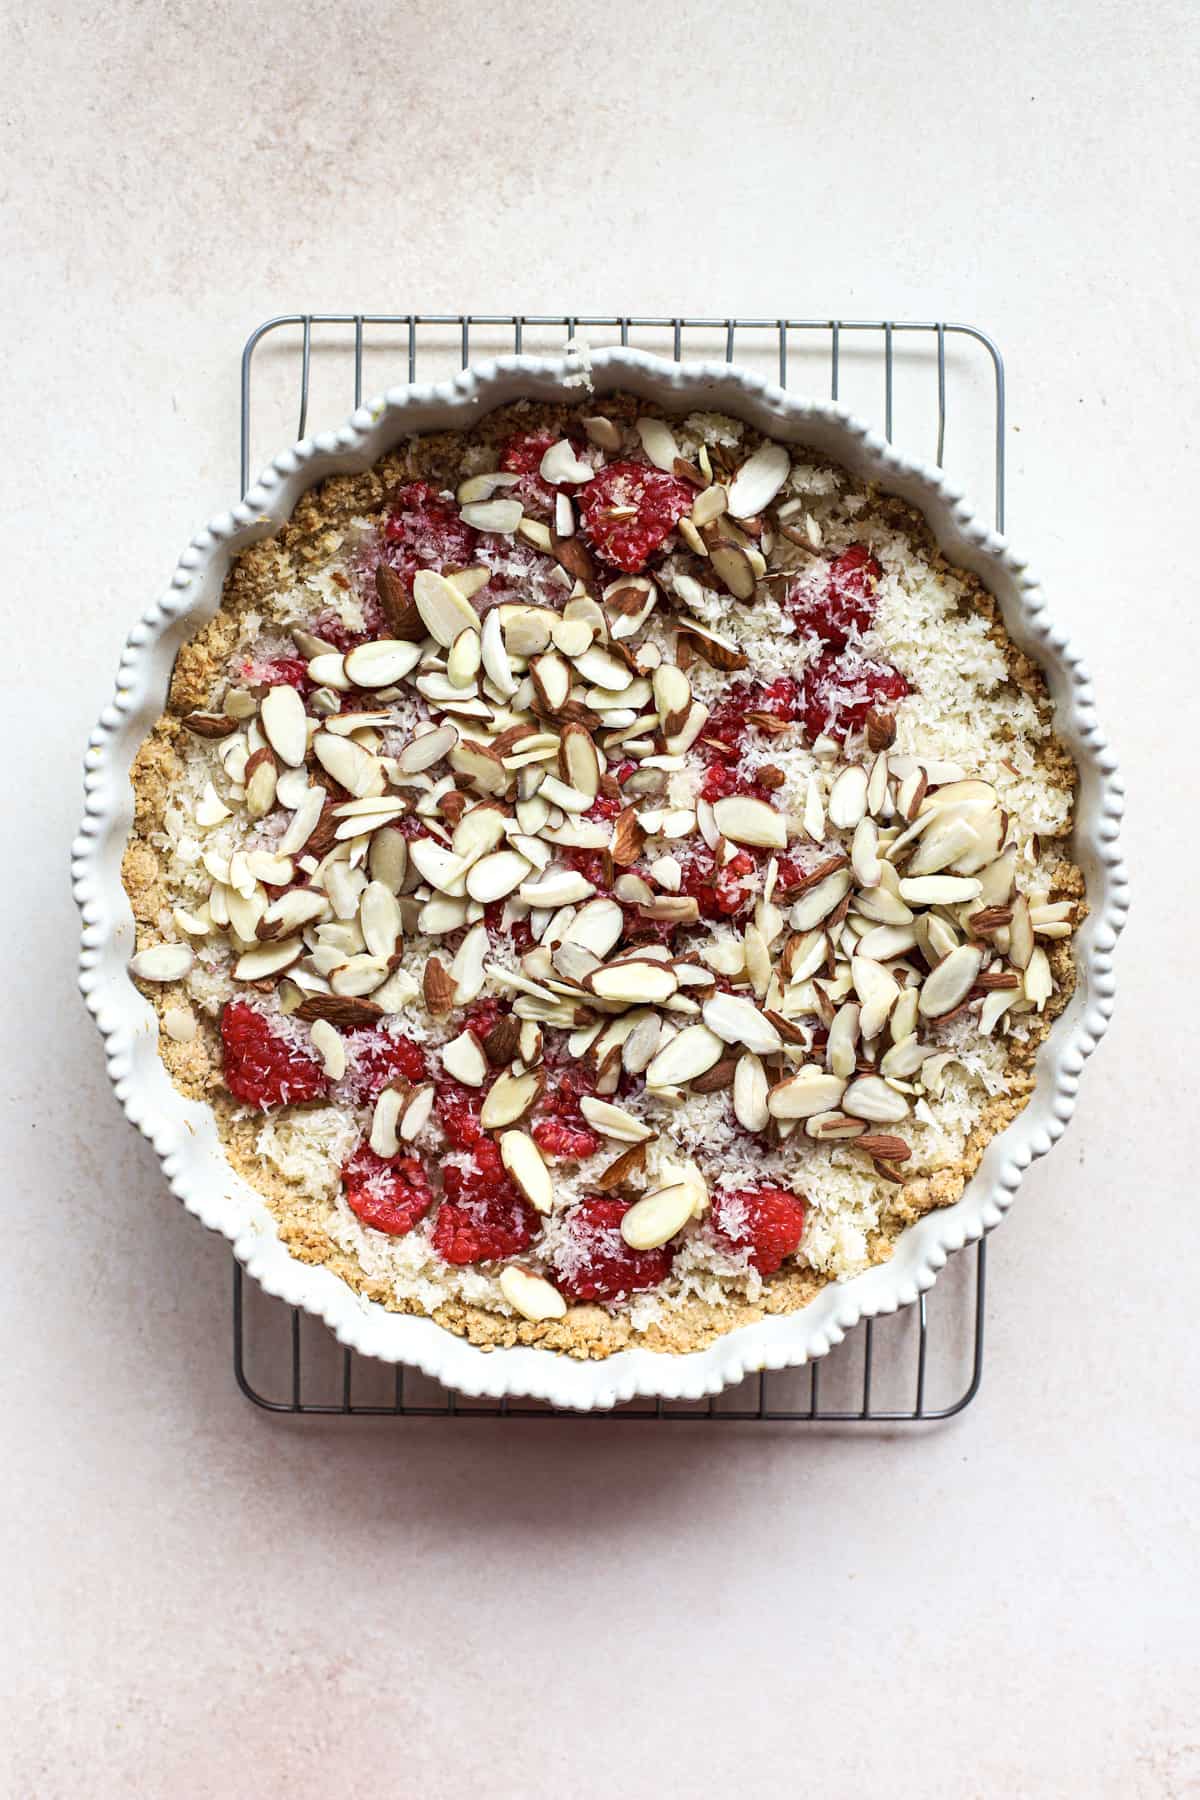 Macaroon crust filling with coconut macaroon filling, fresh raspberries, and topped with sliced almonds before baking